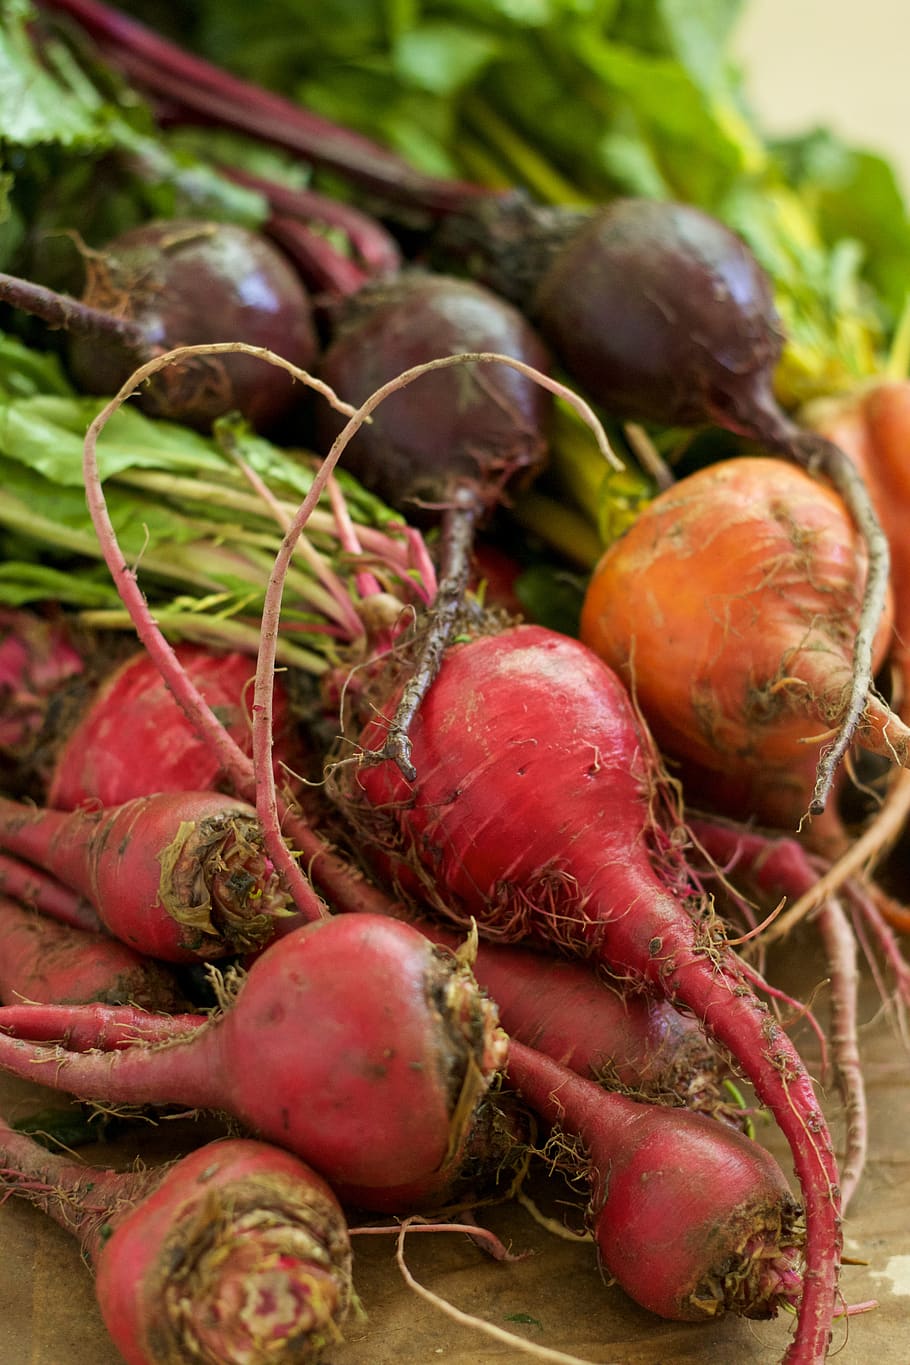 beet, greens, vegetable, food and drink, food, healthy eating, wellbeing, freshness, root vegetable, close-up